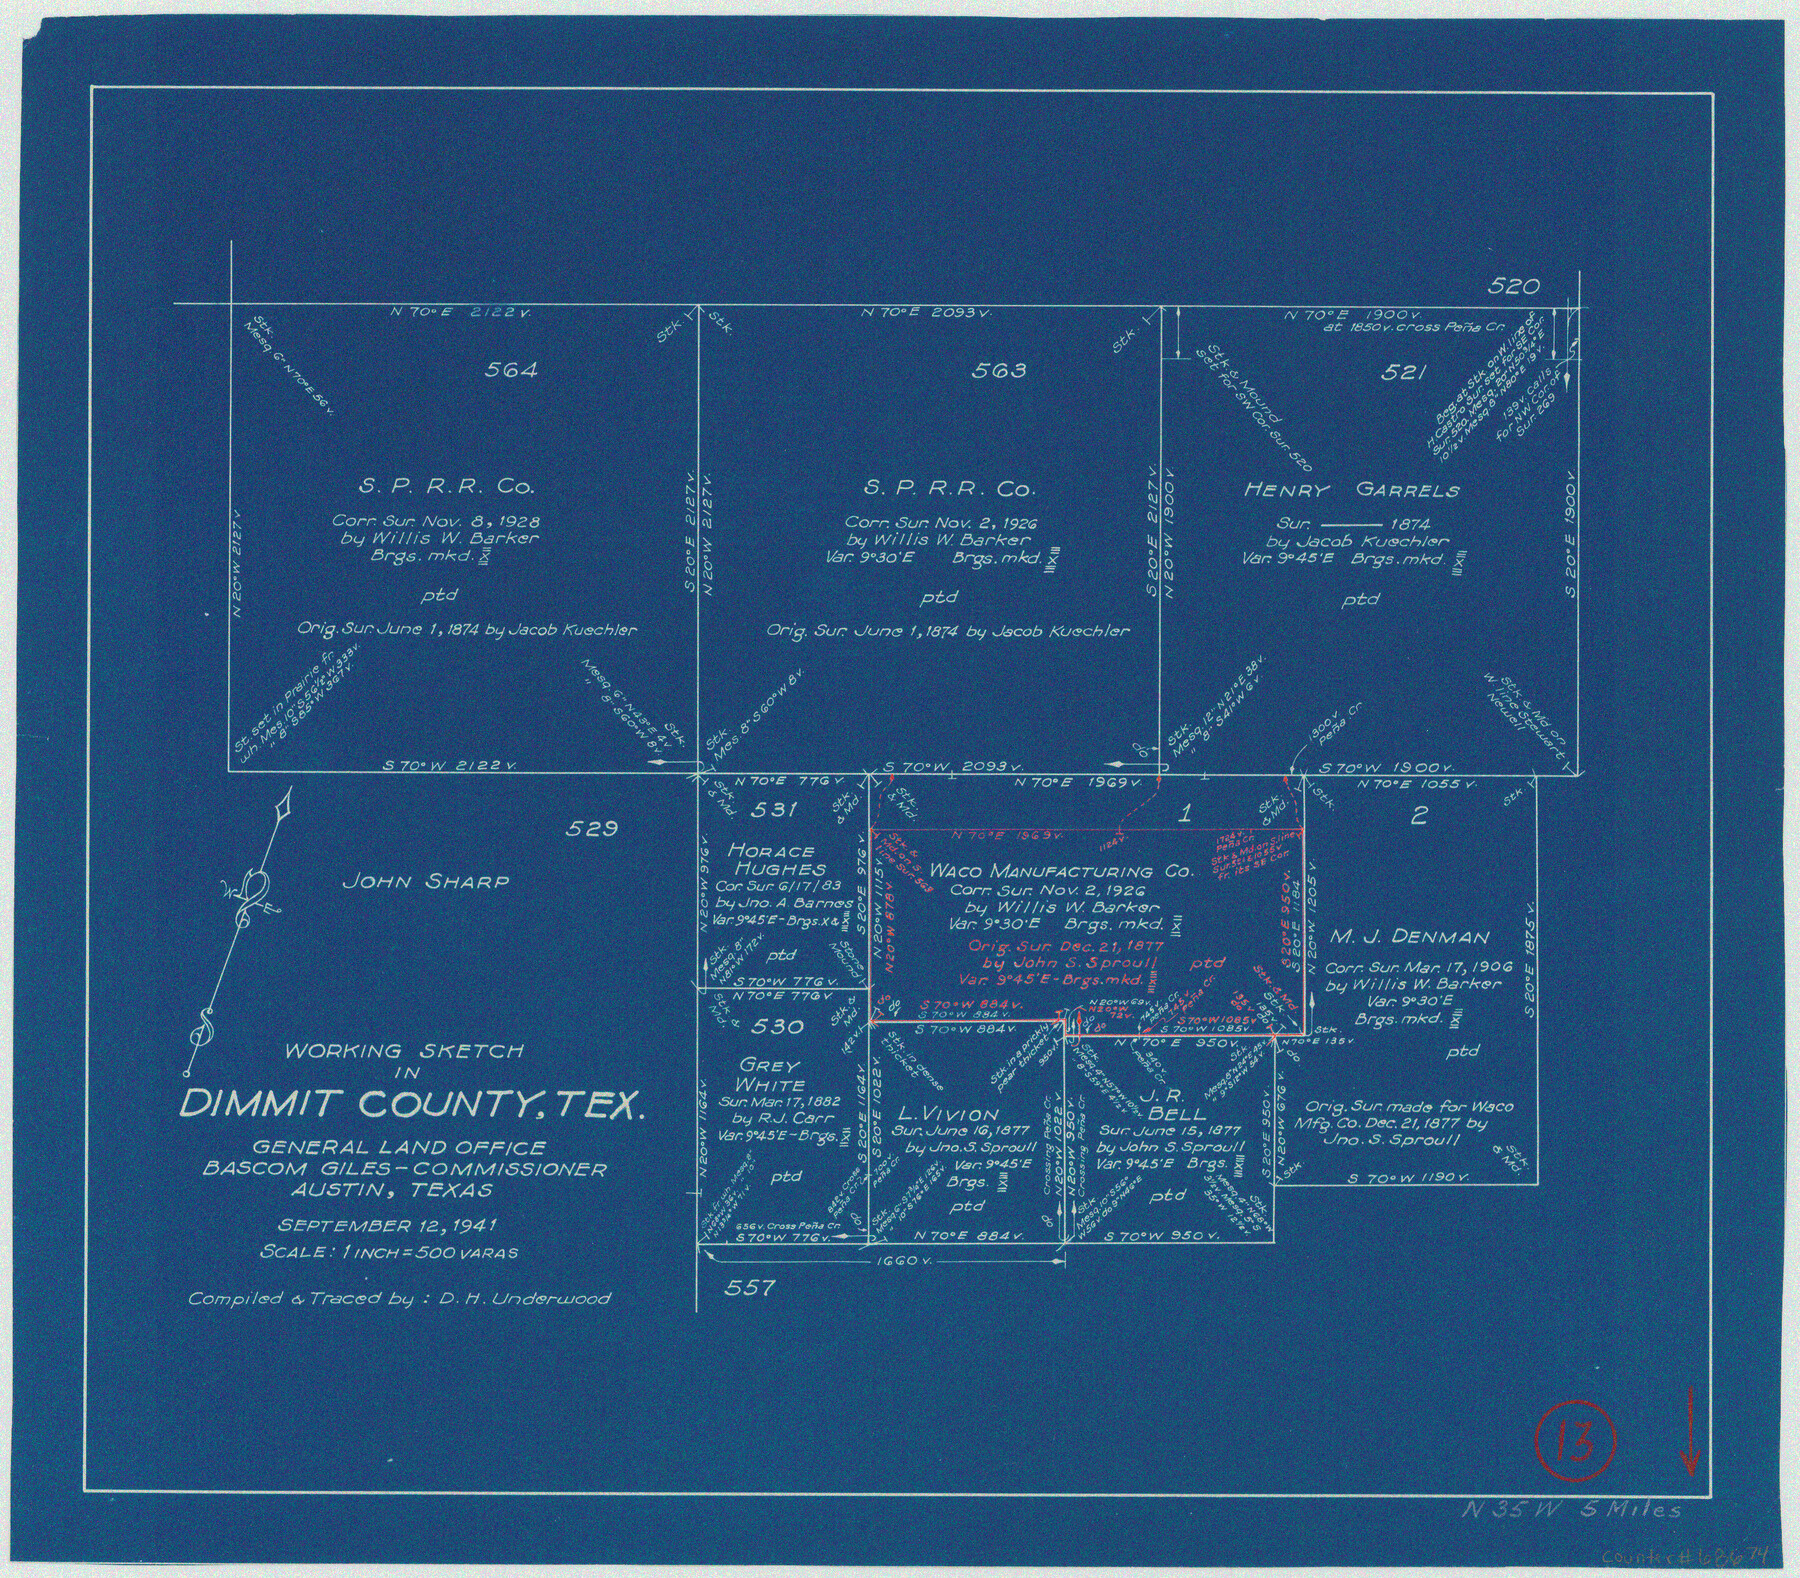 68674, Dimmit County Working Sketch 13, General Map Collection